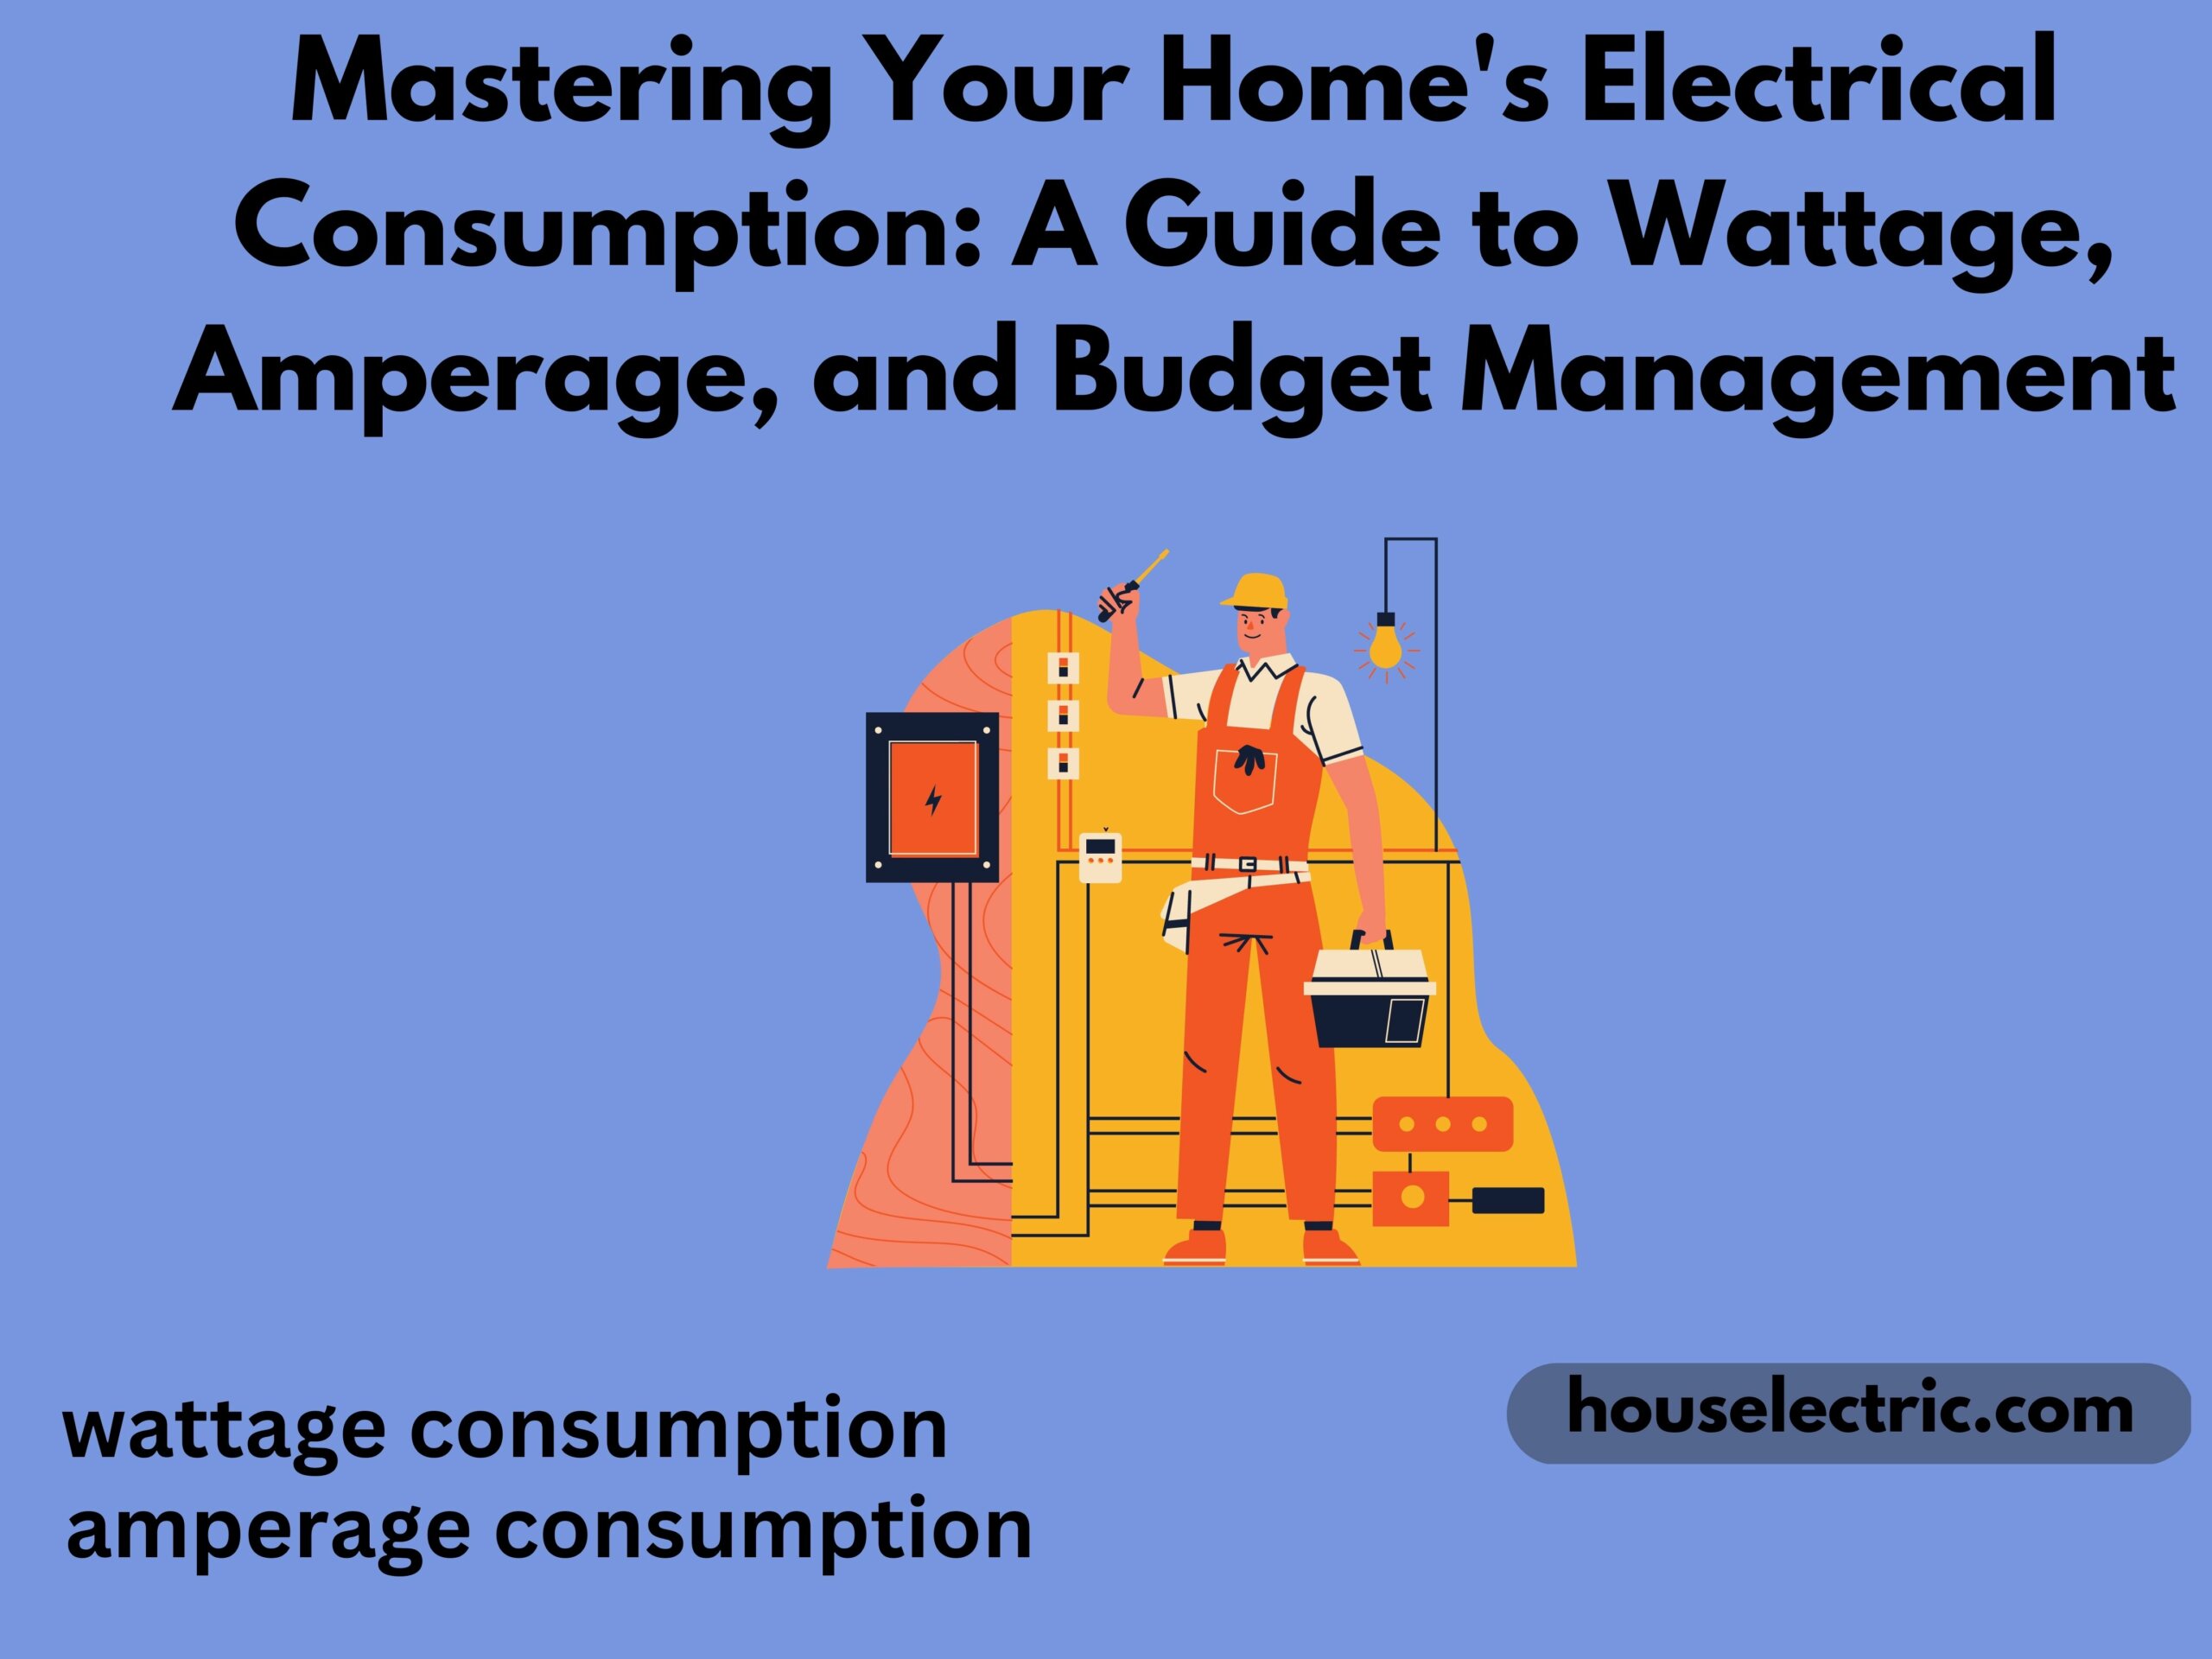 home's electrical consumption